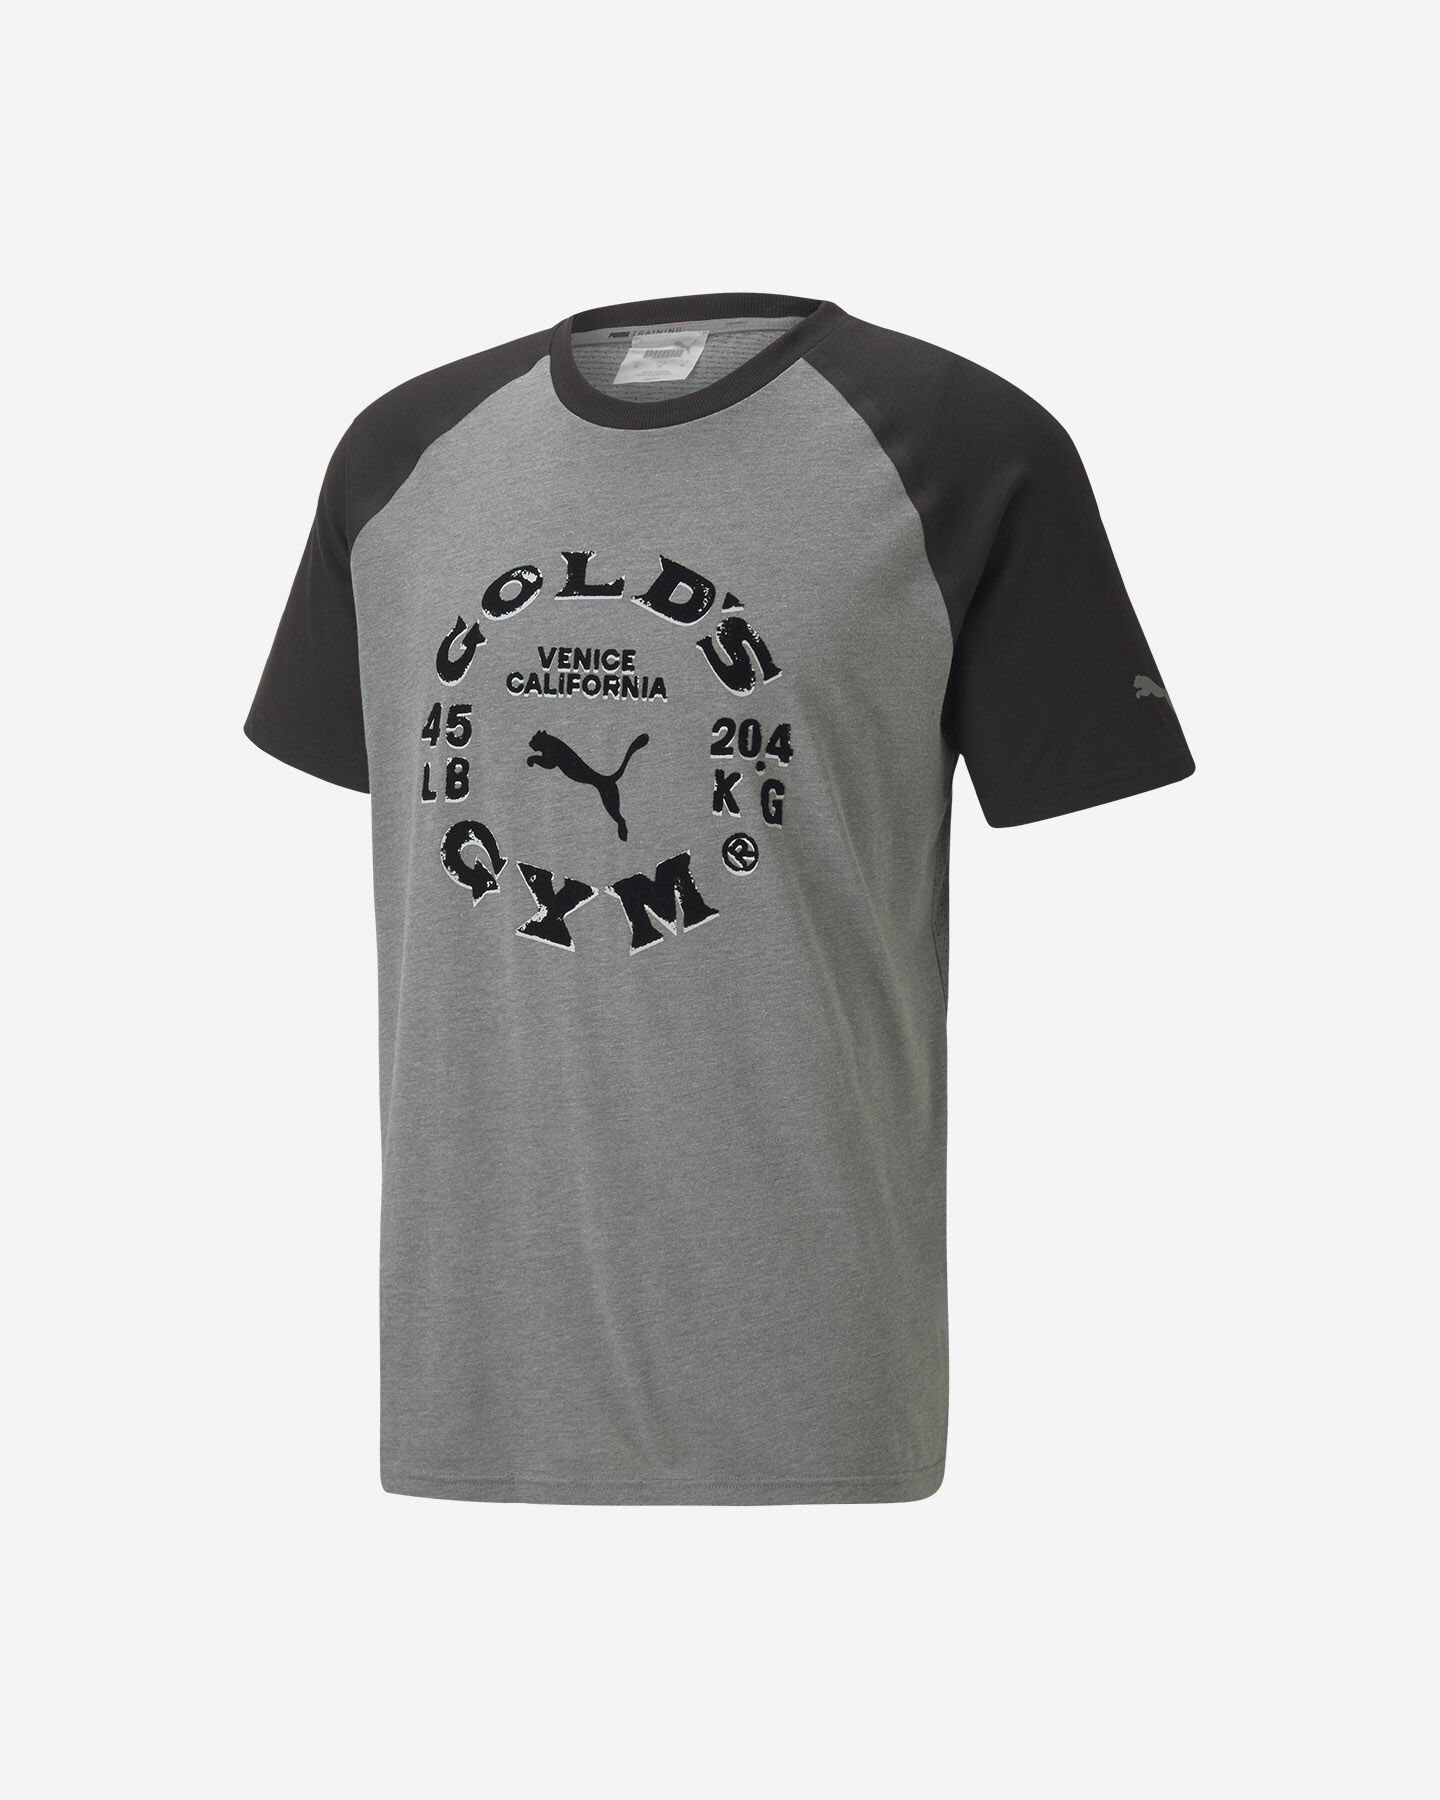  T-Shirt PUMA GOLD'S GYM M S5197190|01|S scatto 0